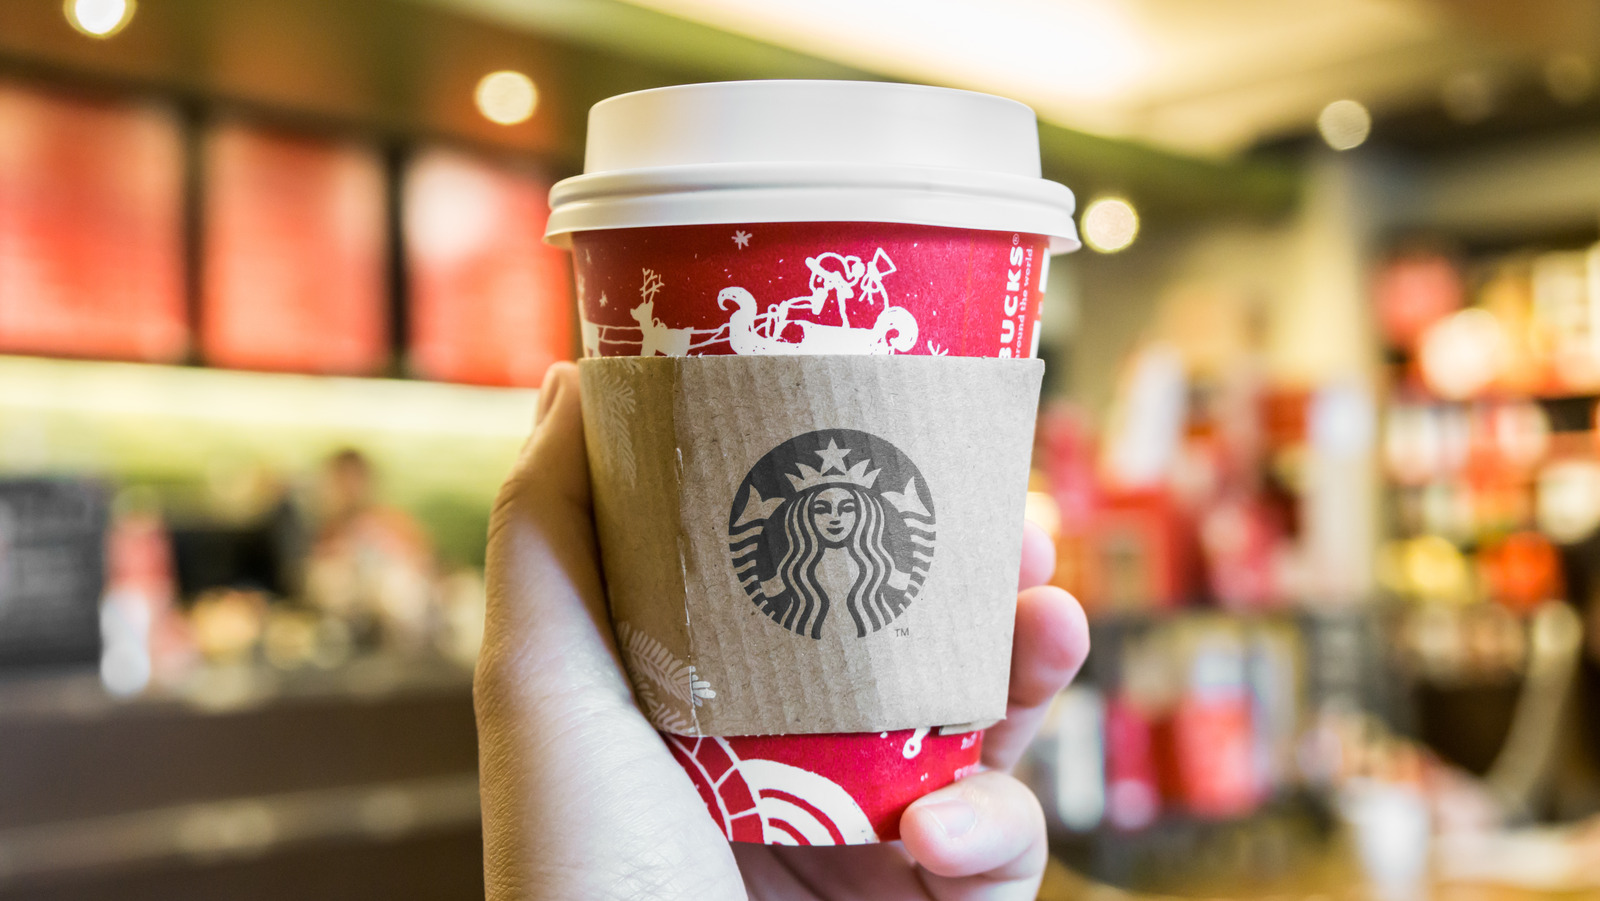 https://www.thedailymeal.com/img/gallery/starbucks-has-officially-started-the-countdown-to-red-cup-day/l-intro-1668535895.jpg